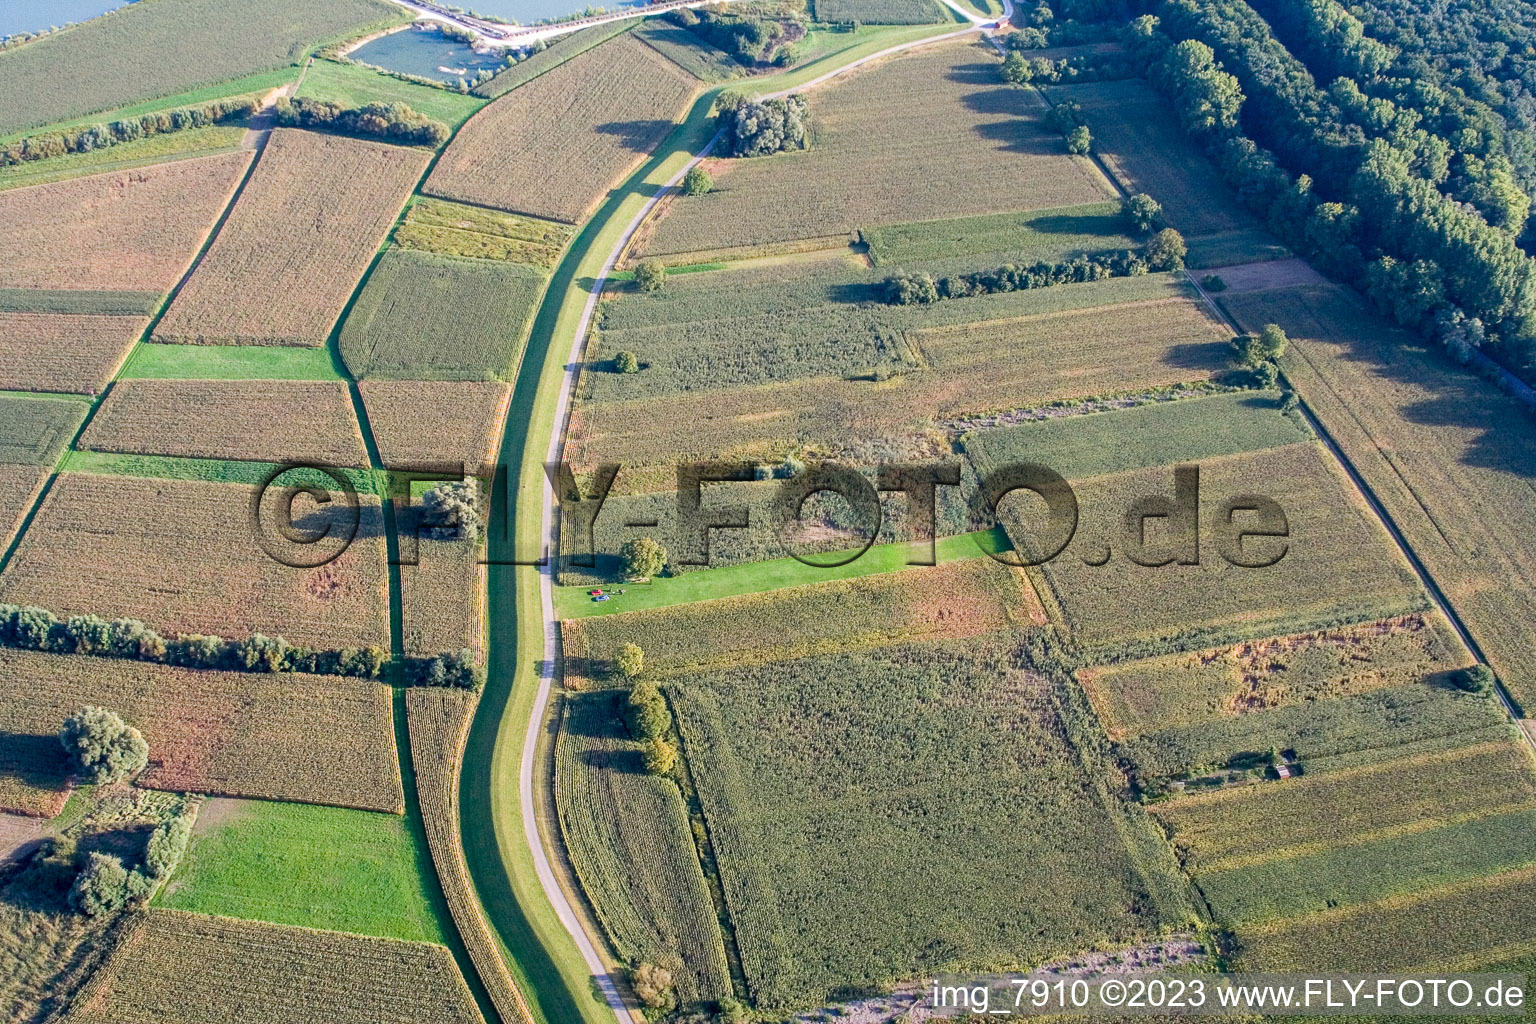 Aerial view of Model airfield in Hagenbach in the state Rhineland-Palatinate, Germany